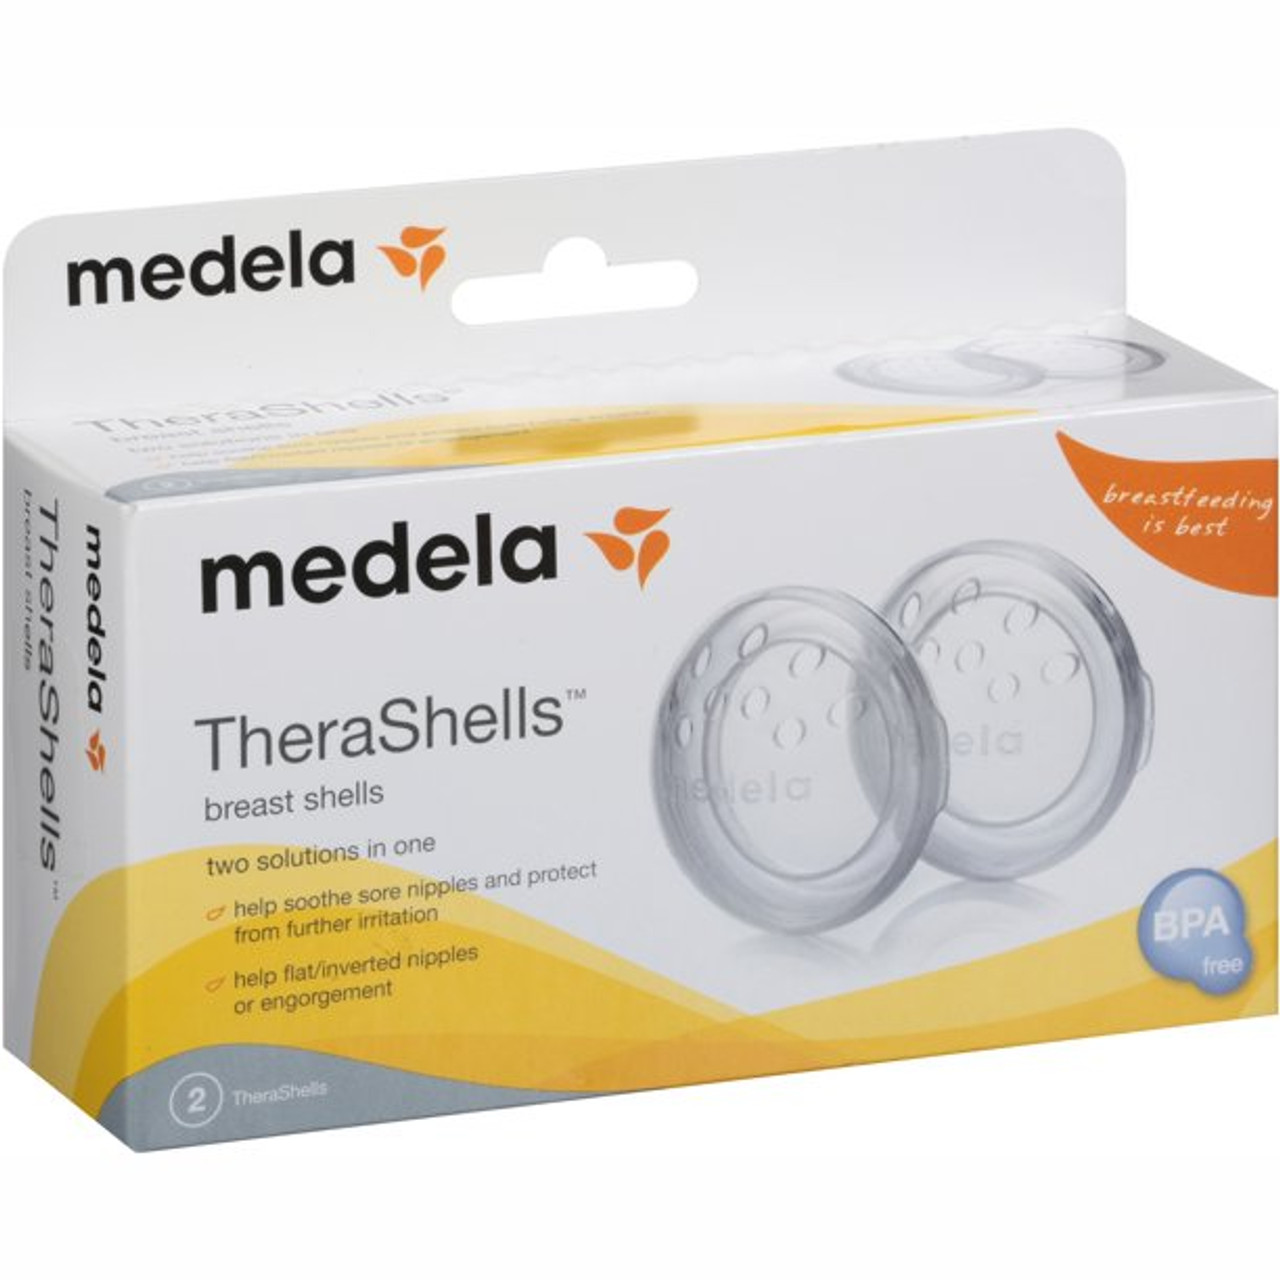 Medela TheraShells Breast Shells, Protect Sore, Flat, or Inverted Nipples  While Pumping or Breastfeeding